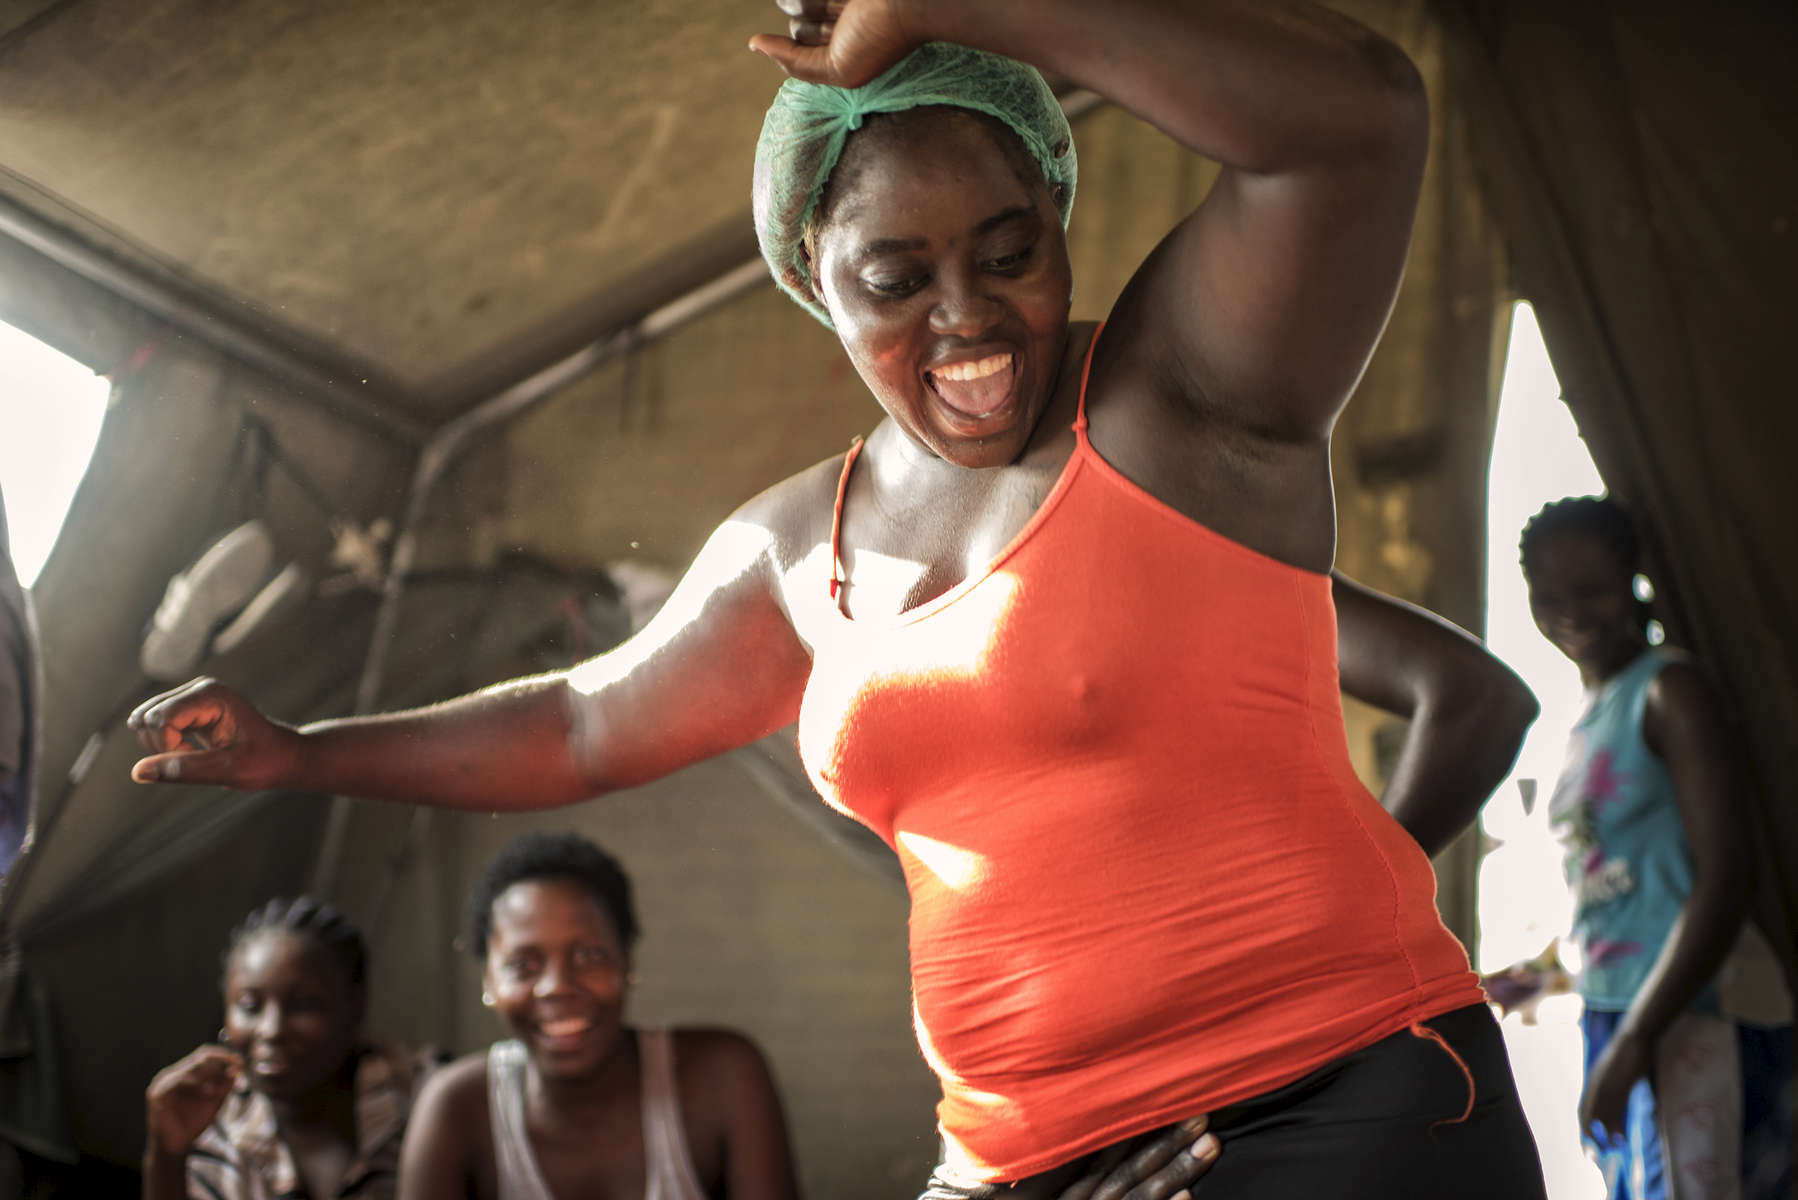 May 3, 2018: KANENGUERERE, ANGOLA - HALO deminer Laurinda Capembe dances in her tent after a full day's  work clearing anti-personnel mines in Kanenguerere.  The area was mined during the civil war by government forces to protect the nearby railway line that can be seen in the background, as well as various troop positions. It is currently used by roughly 170 people including village residents and nomadic herders - many of whom are young children - who pass through uncleared land every day. 